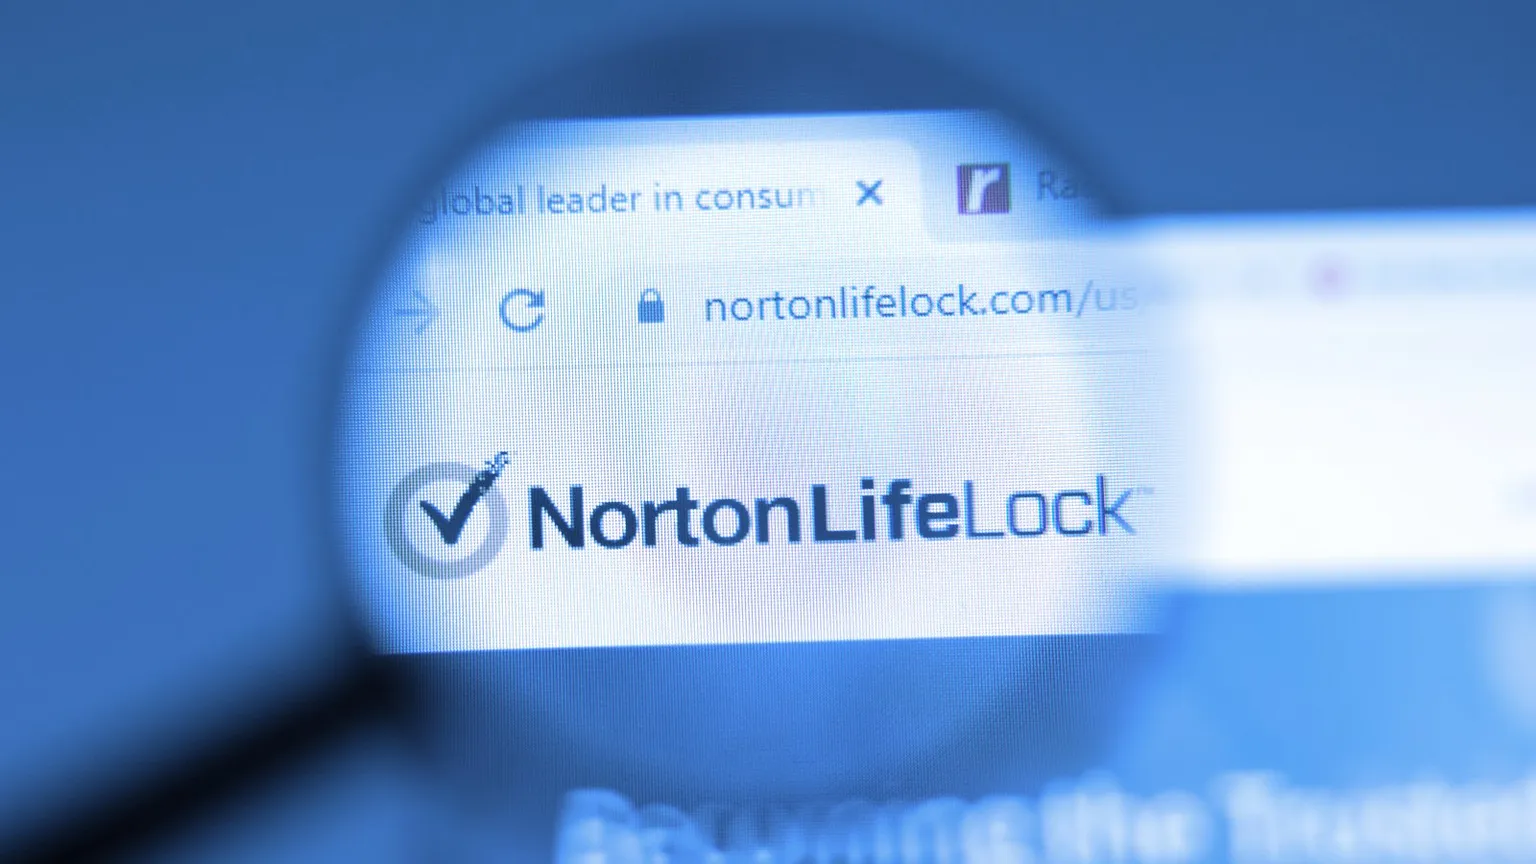 NortonLifeLock is a fortune 500 company that offers cybersecurity software. Image: Shutterstock